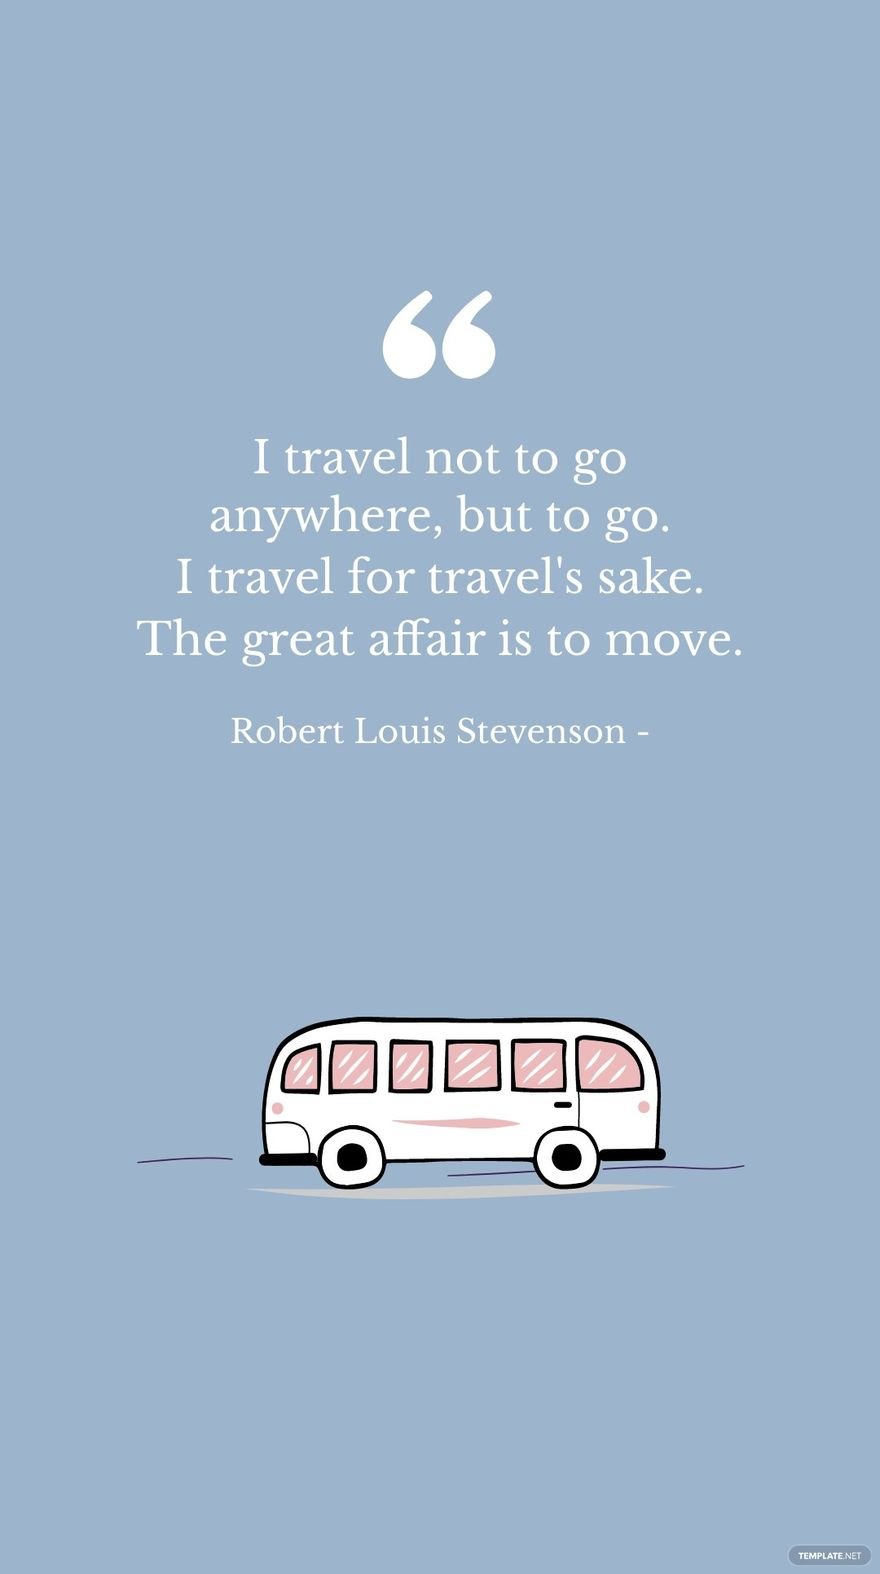 Robert Louis Stevenson - I travel not to go anywhere, but to go. I travel for travel's sake. The great affair is to move.